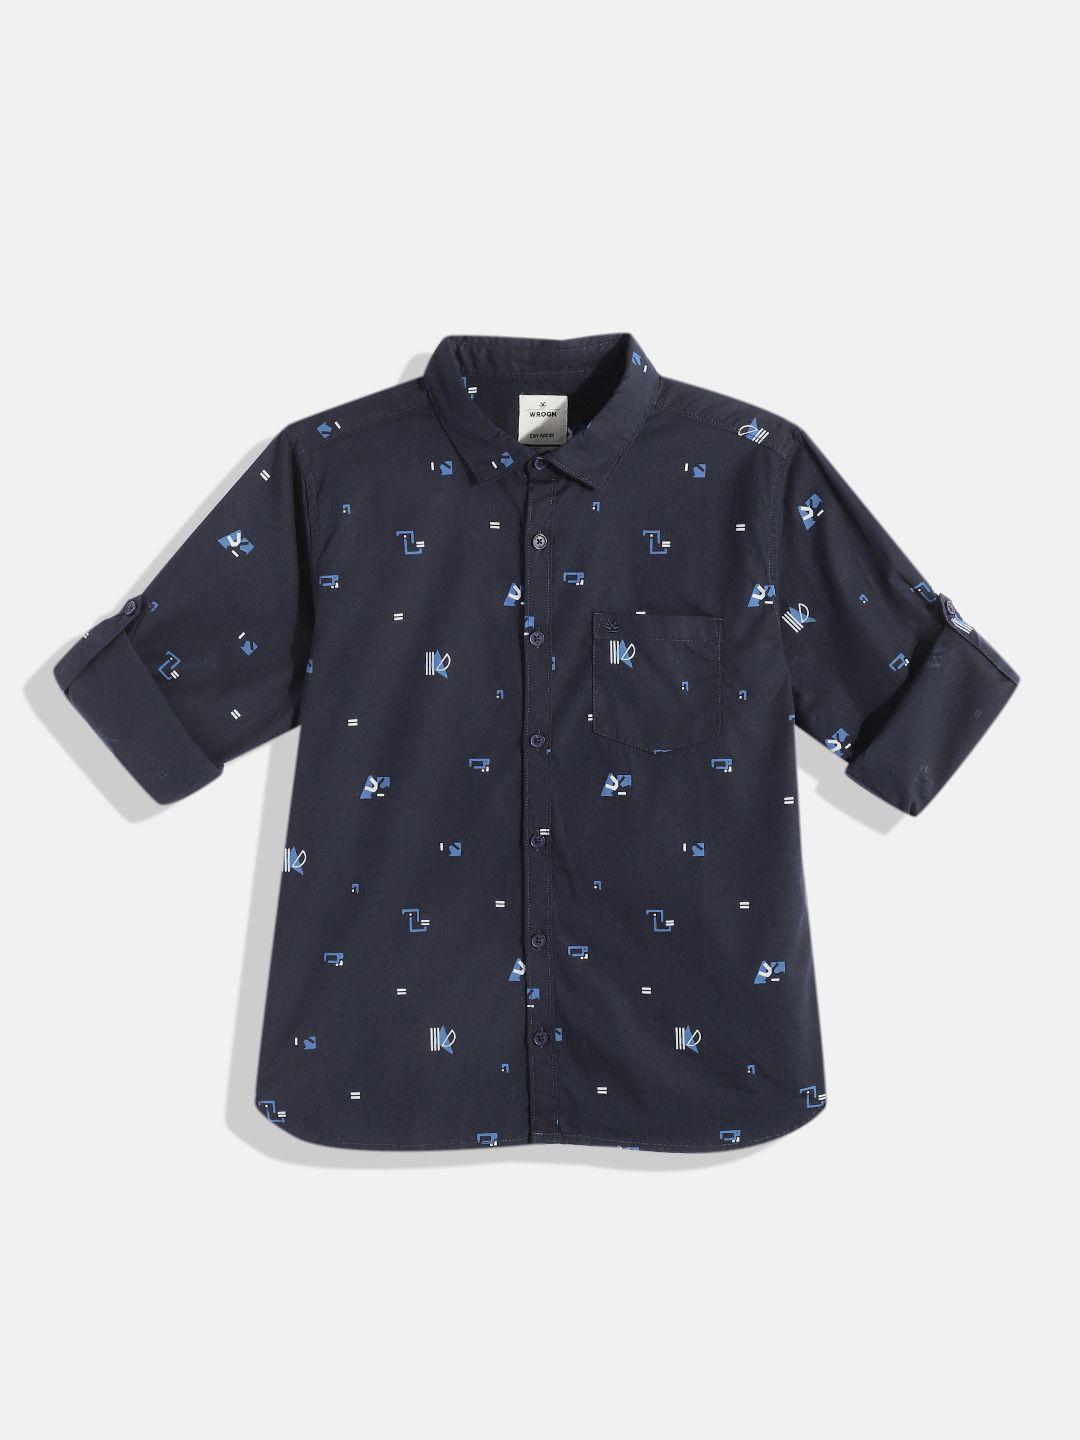 wrogn-youth-boys-slim-fit-printed-pure-cotton-casual-shirt